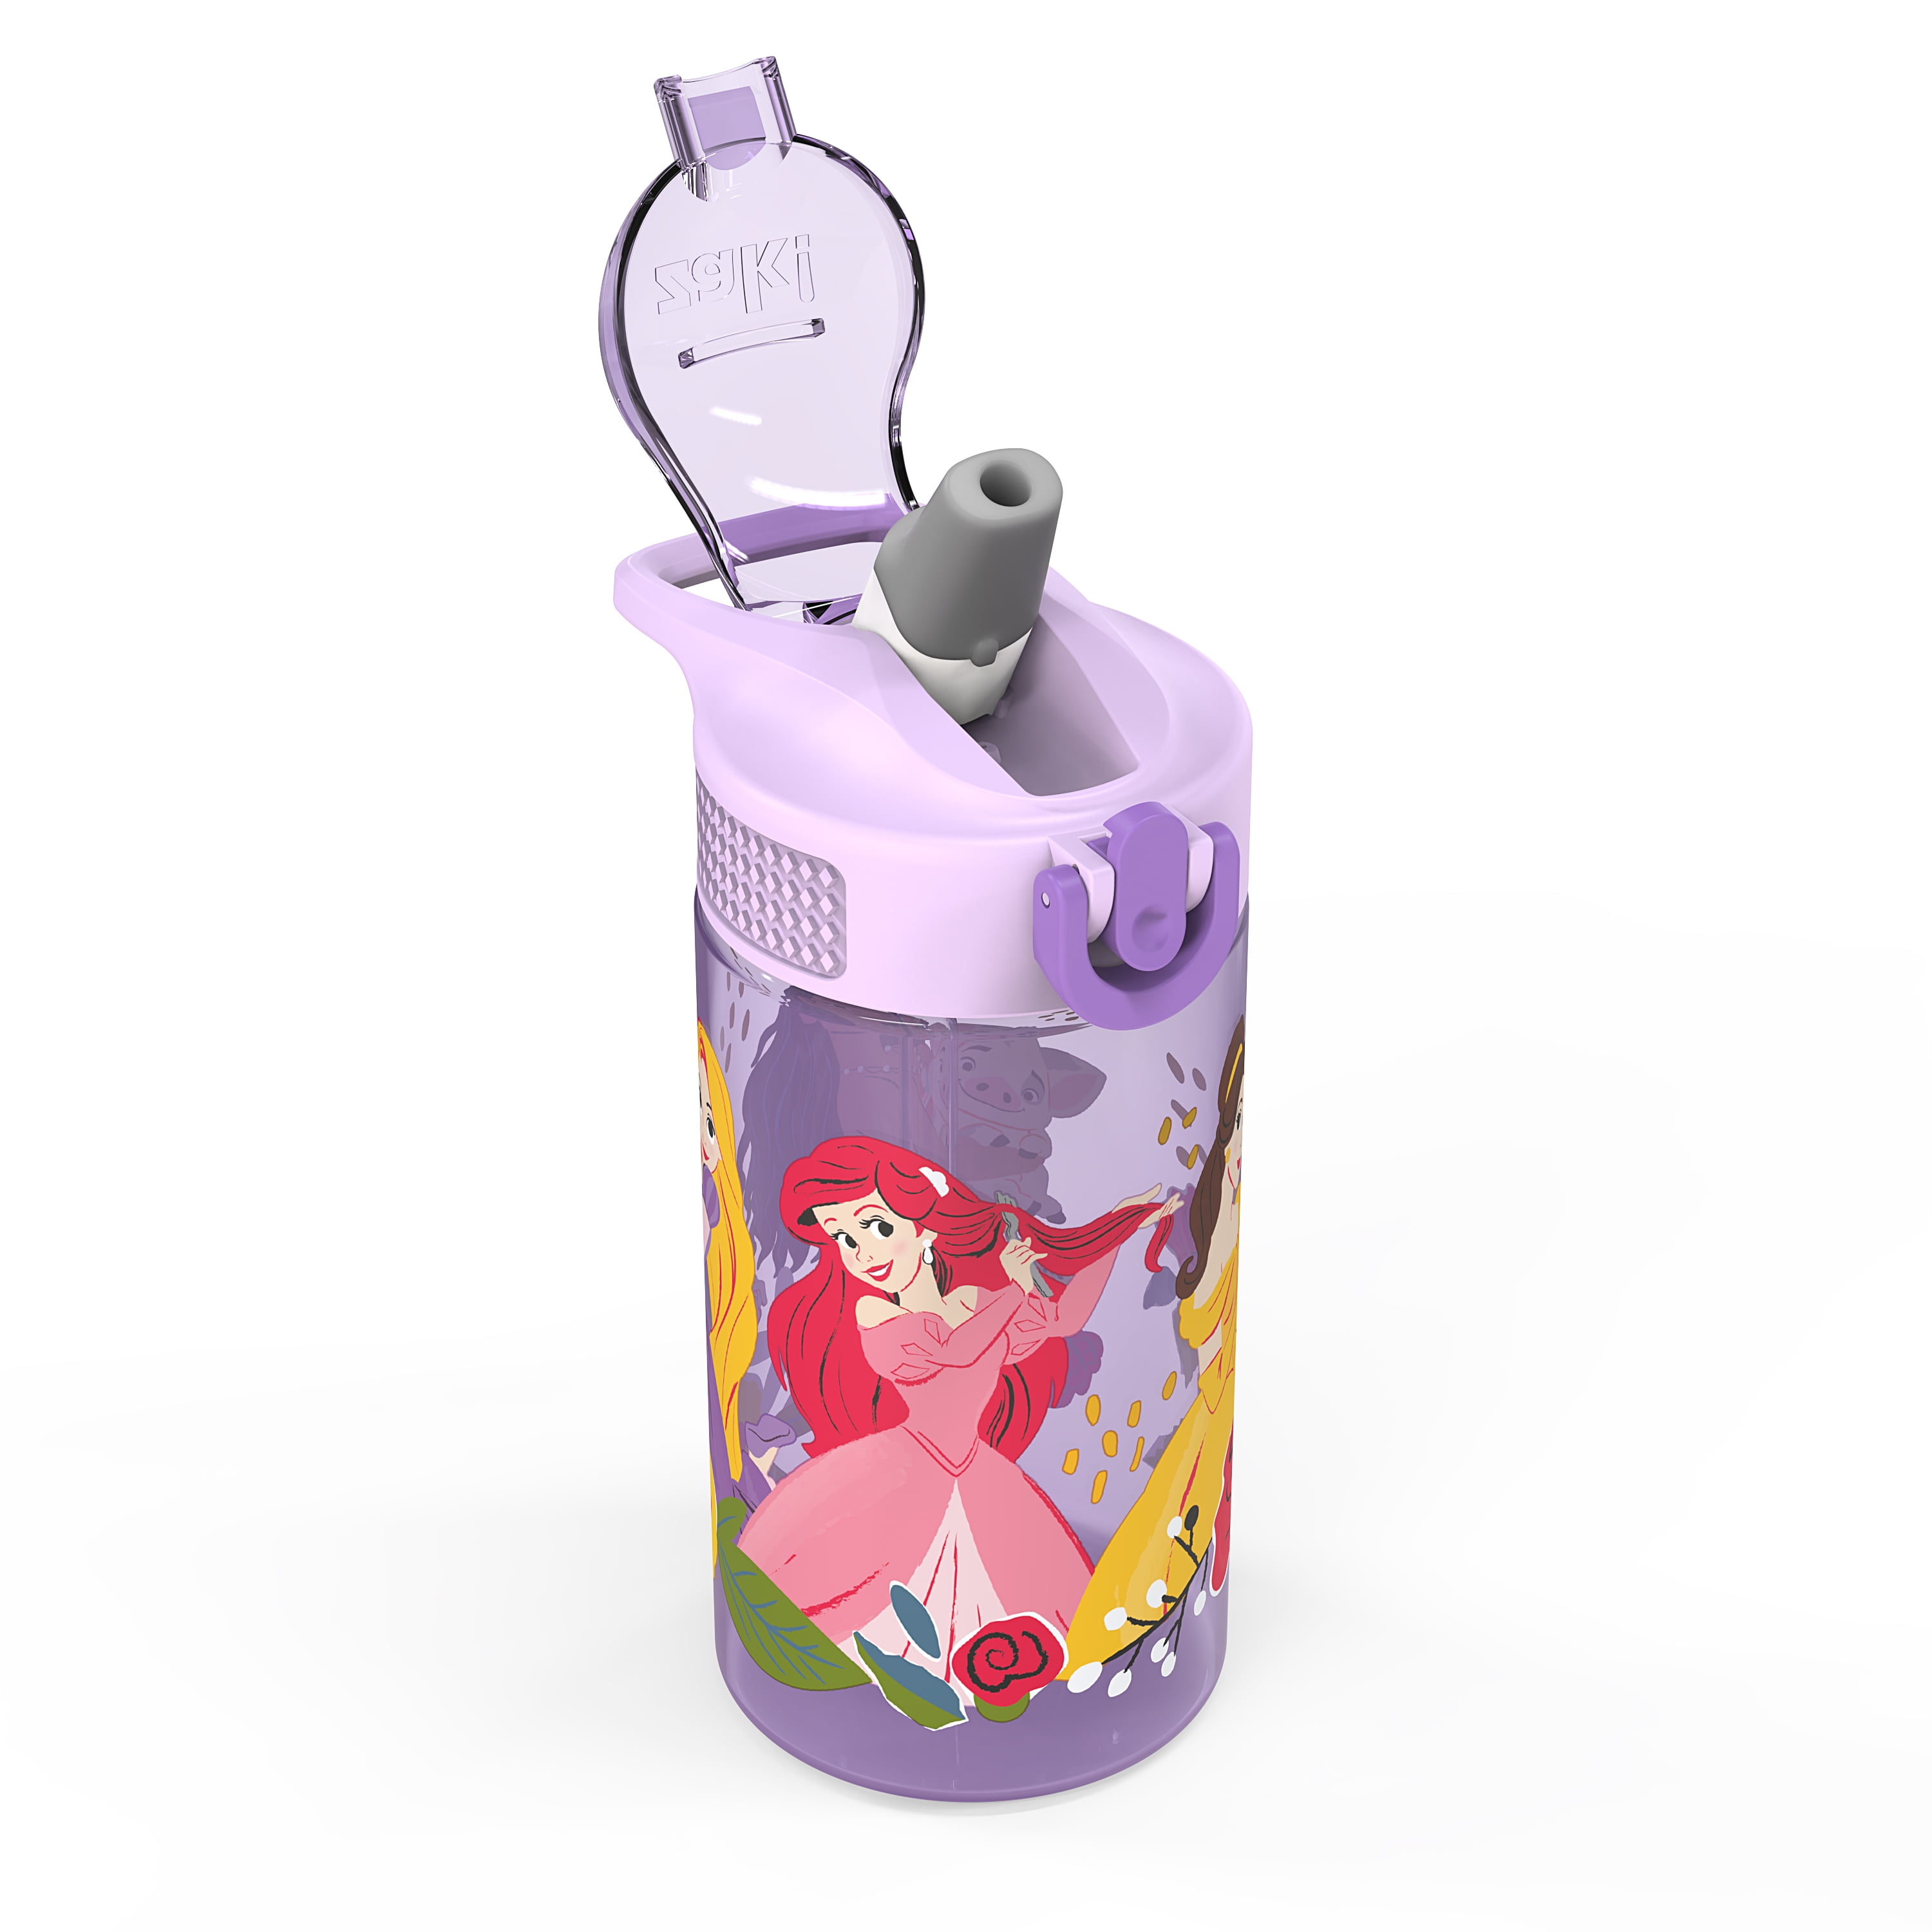 Zak Designs 2pc 16 oz Disney Kids Water Bottle Plastic with Easy-Open  Locking Spout Cover for Travel, Princess 